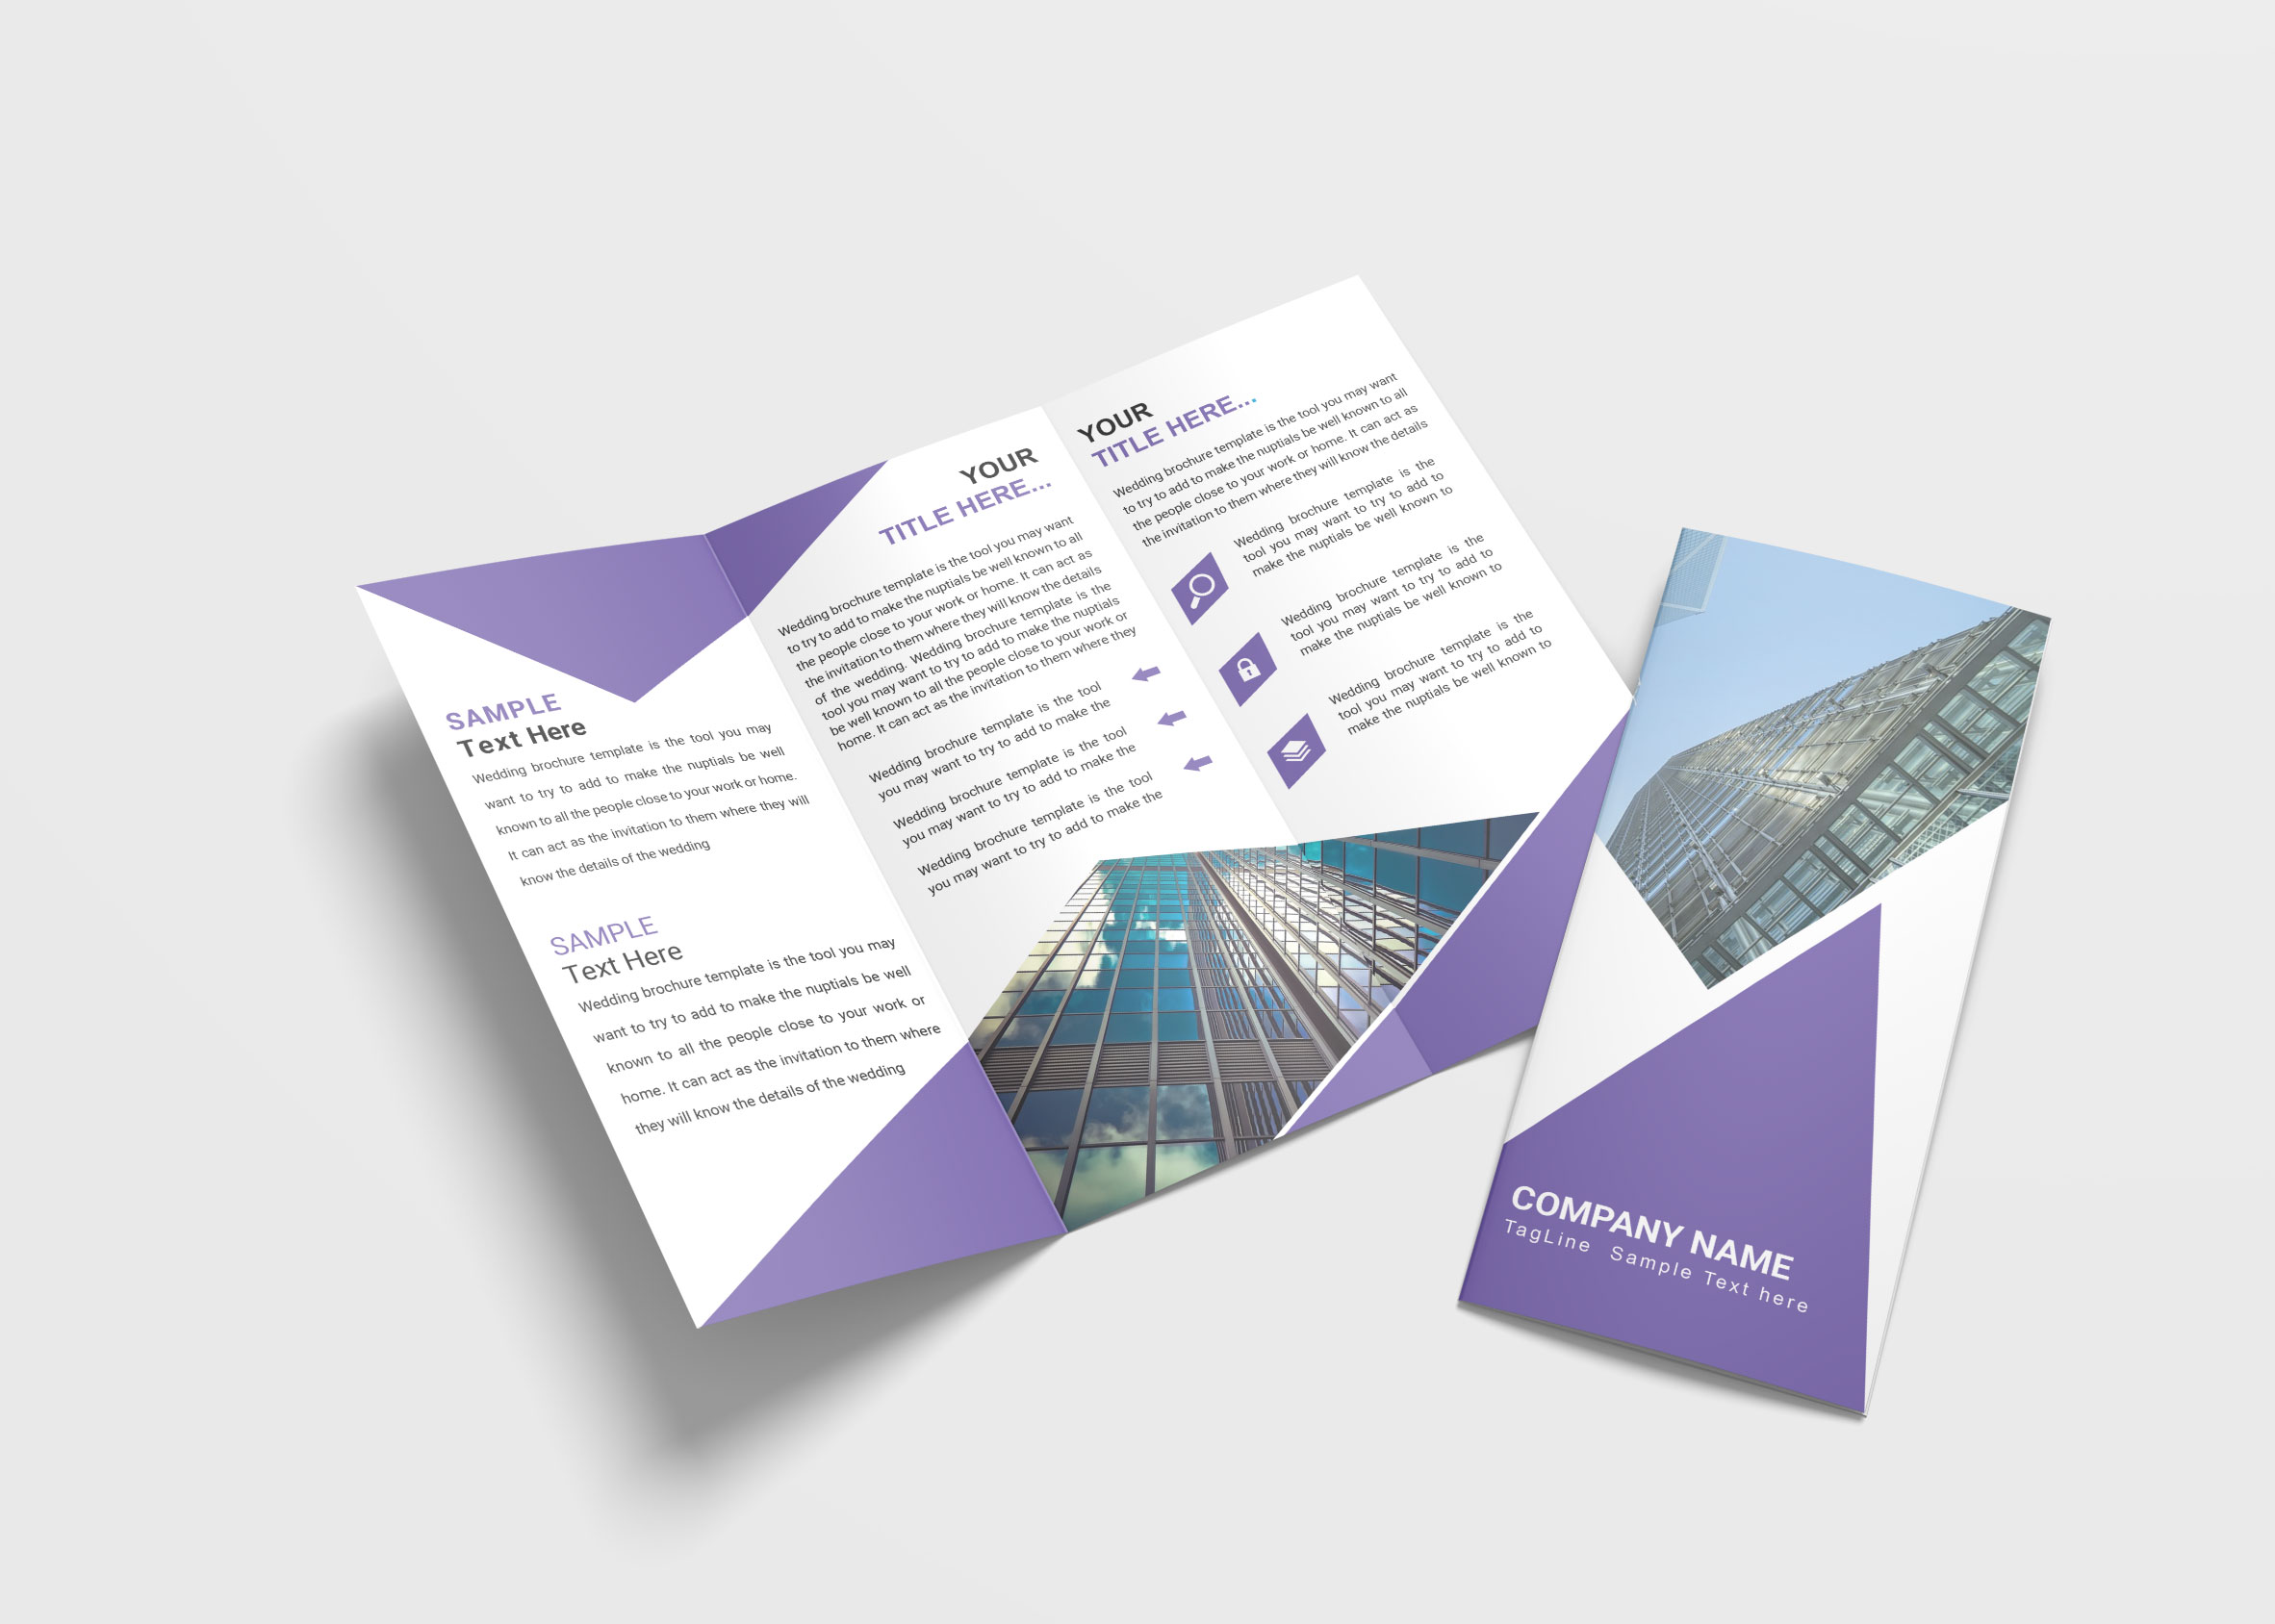 Marketing Consultants Business TriFold Brochure Design Template